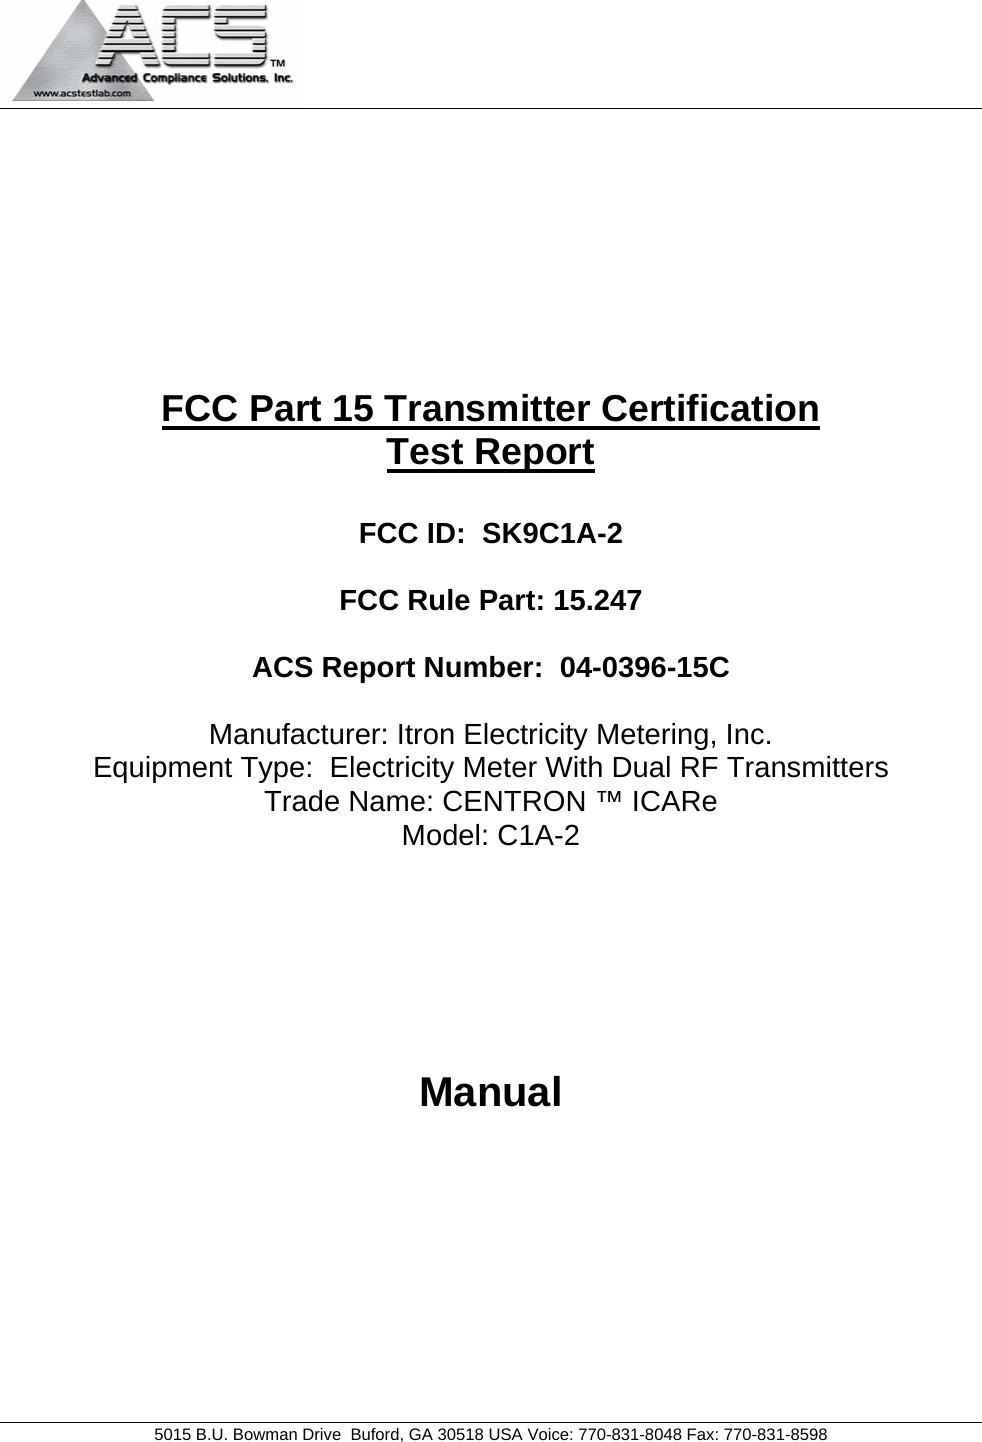                                           5015 B.U. Bowman Drive  Buford, GA 30518 USA Voice: 770-831-8048 Fax: 770-831-8598   FCC Part 15 Transmitter Certification Test Report  FCC ID:  SK9C1A-2  FCC Rule Part: 15.247  ACS Report Number:  04-0396-15C   Manufacturer: Itron Electricity Metering, Inc. Equipment Type:  Electricity Meter With Dual RF Transmitters Trade Name: CENTRON ™ ICARe Model: C1A-2      Manual 